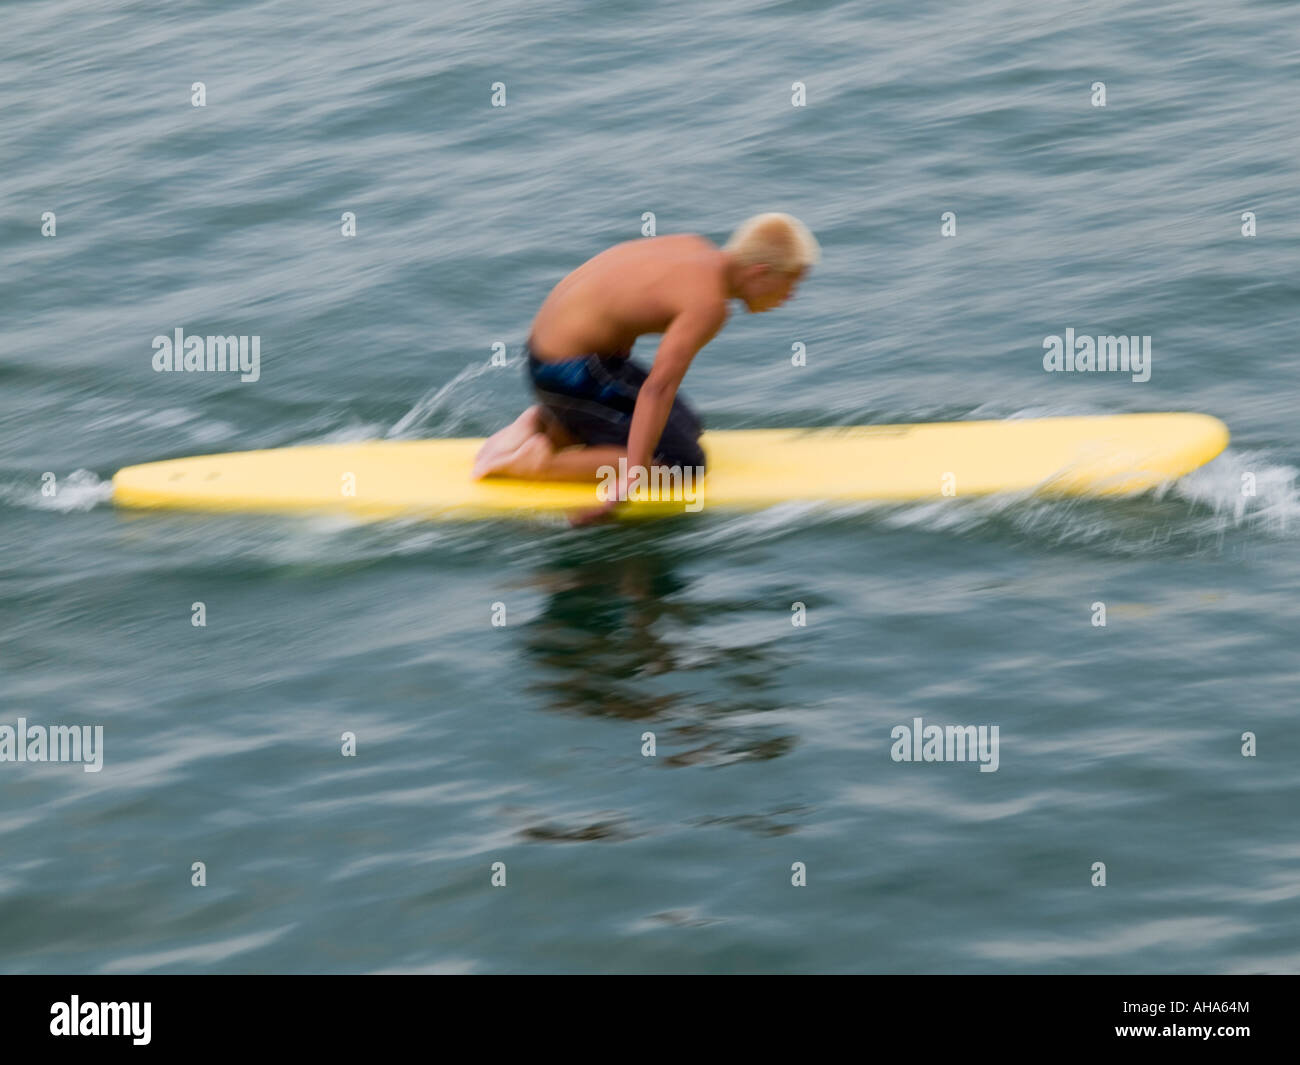 Surfer Yellow Suit Board High Resolution Stock Photography and Images -  Alamy